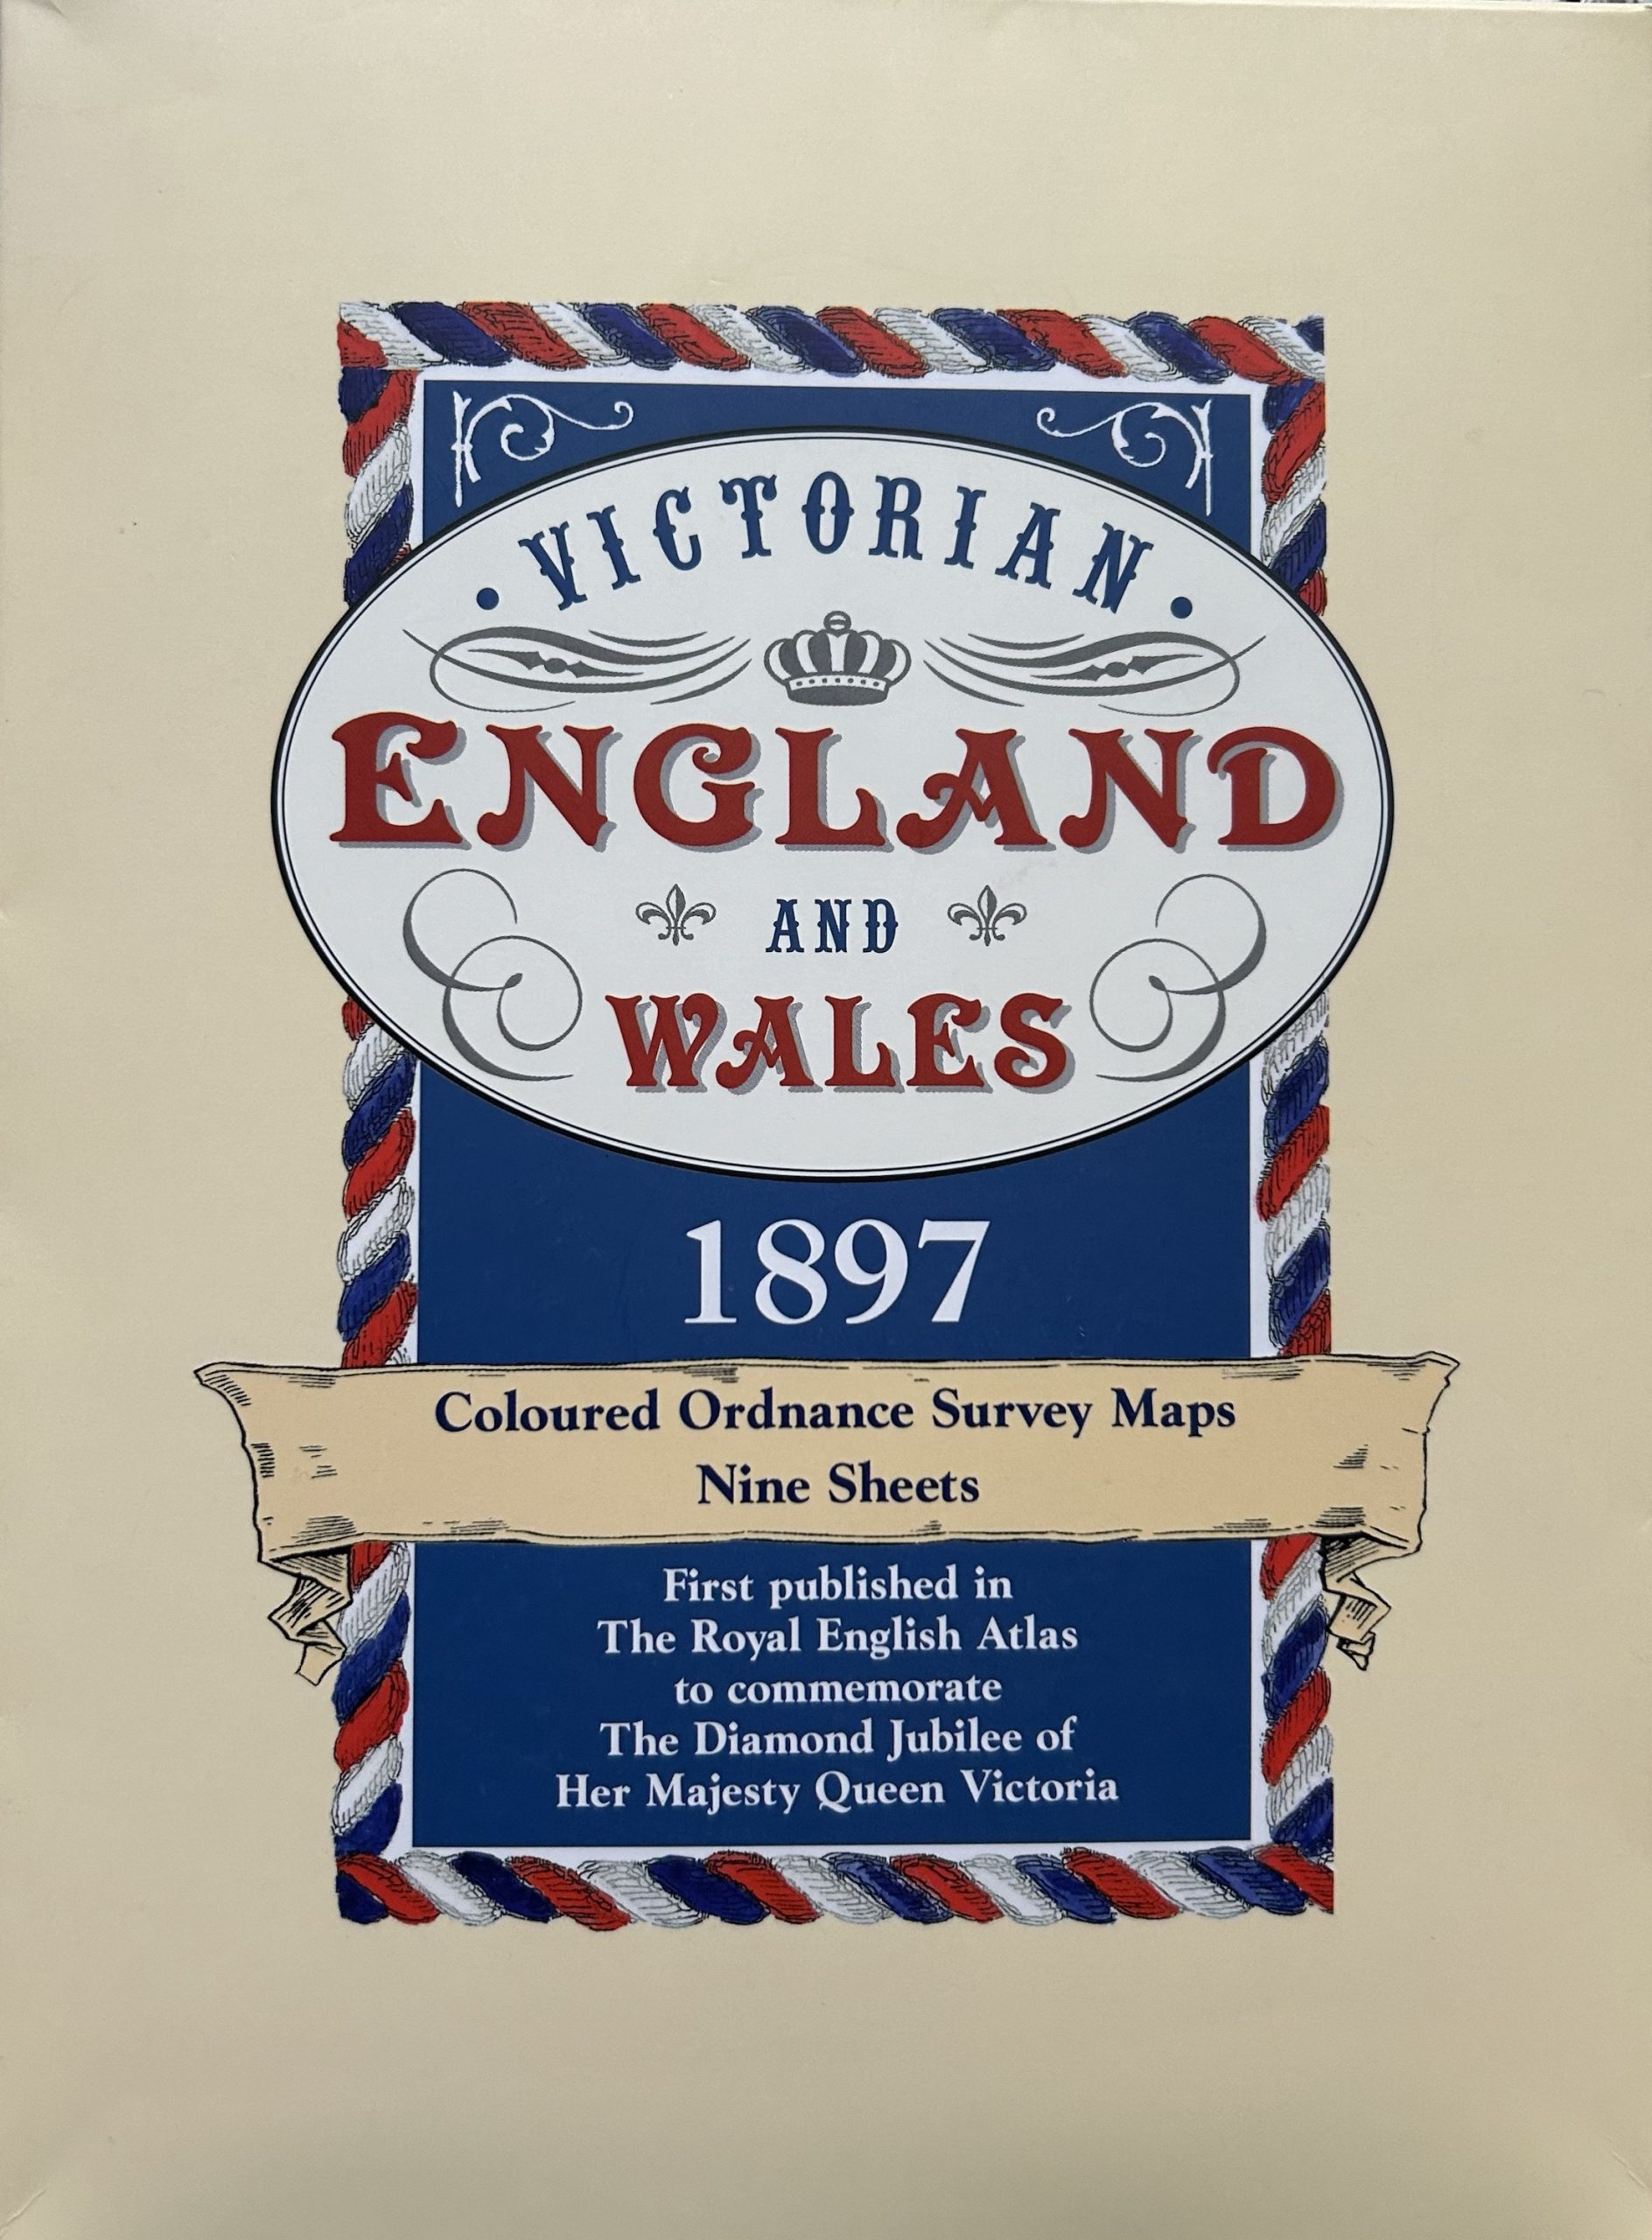 Victorian England and Wales 1897: Coloured Ordnance Survey Maps - 9 Sheets